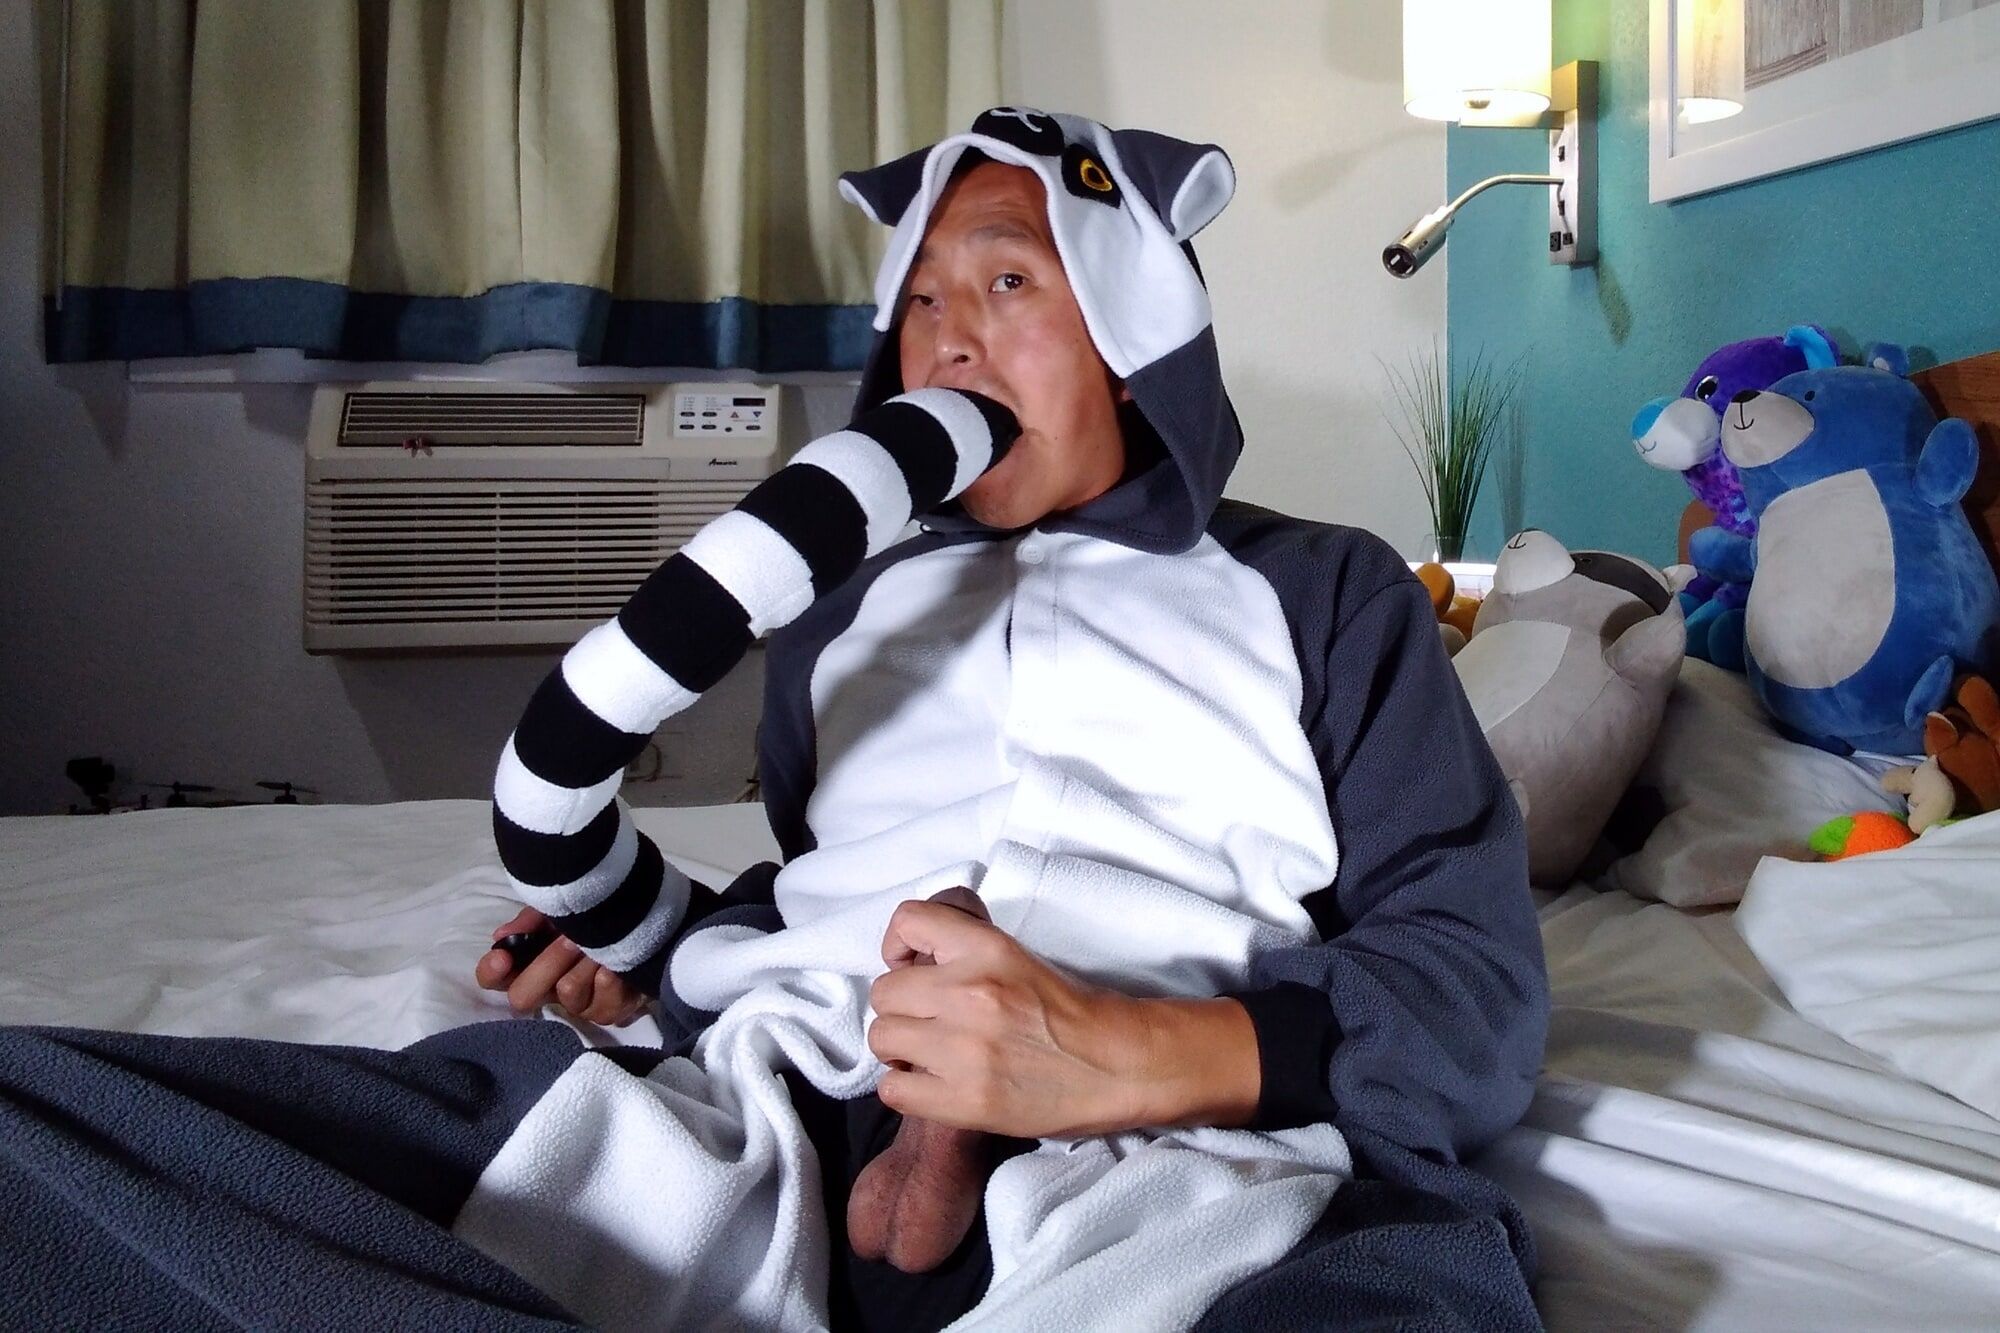 Hot asian boy wearing furry onesies and shiny undies